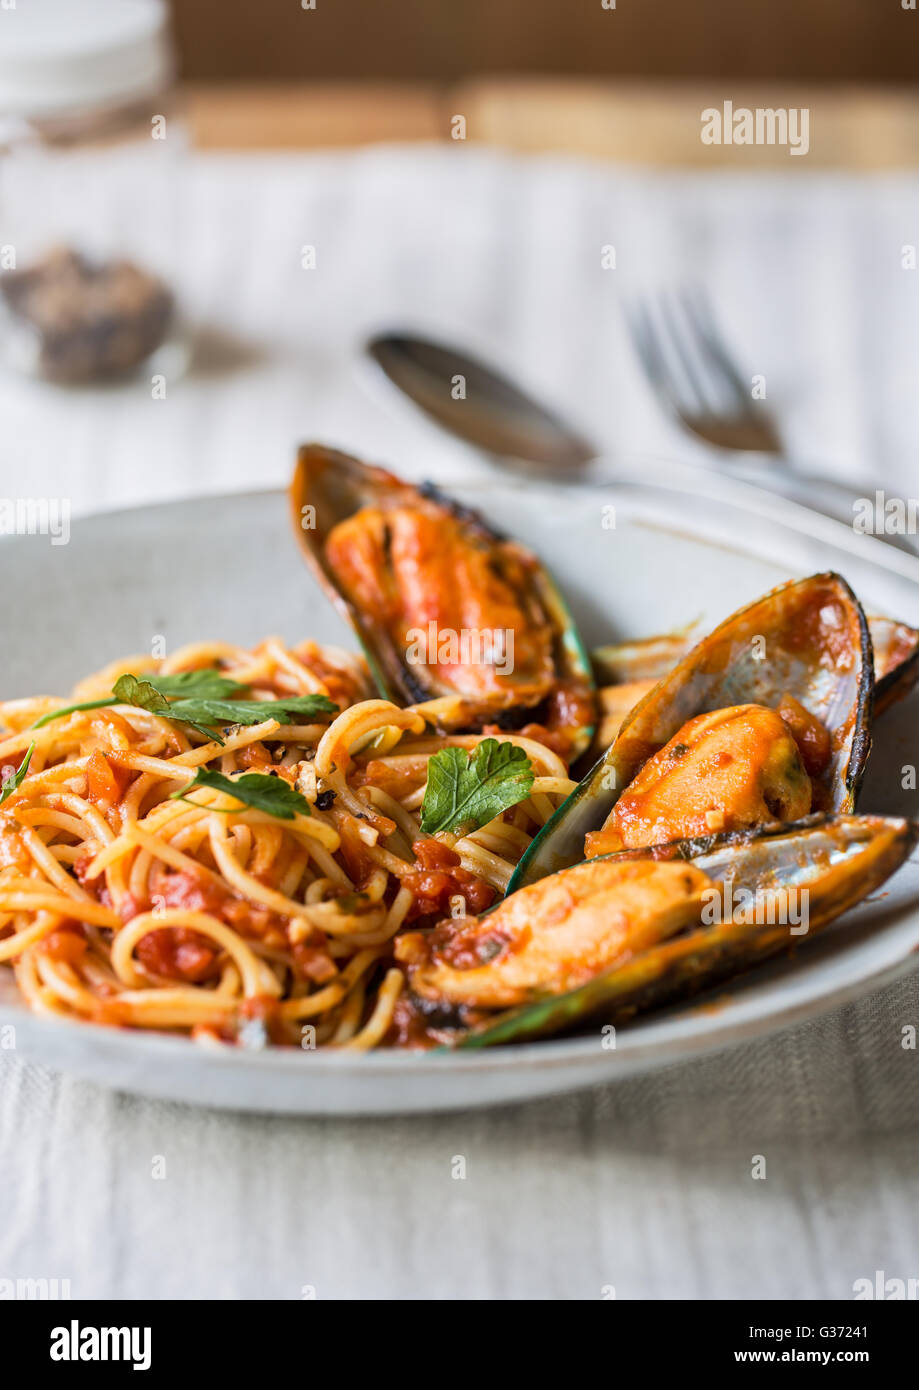 Spaghetti with Mussel in tomato and herbs sauce Stock Photo